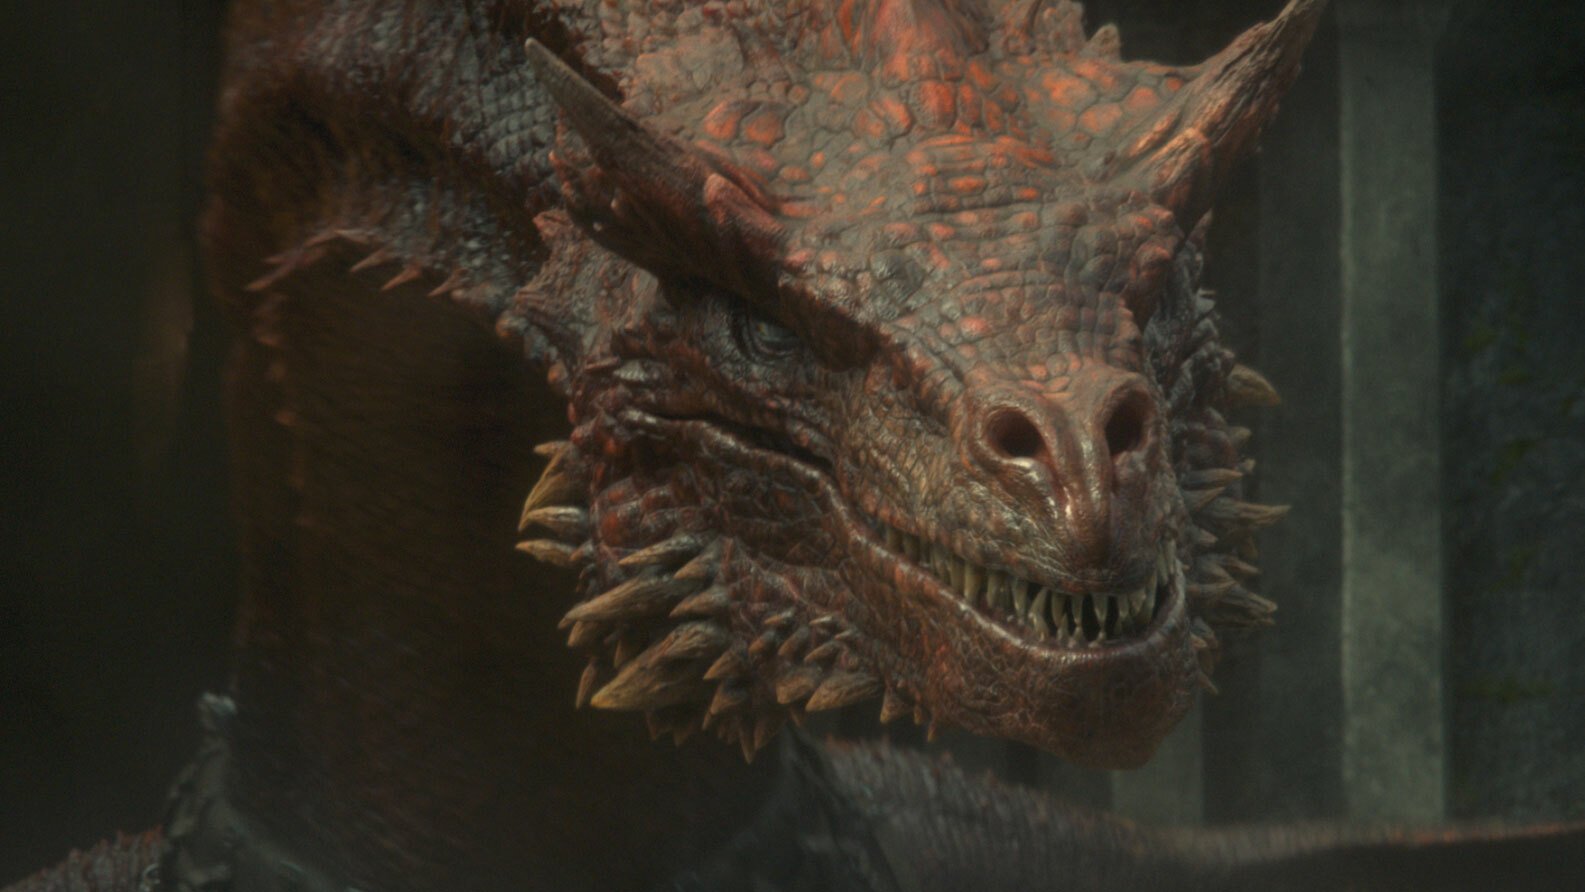 A large dragon stares in the direction of the camera.